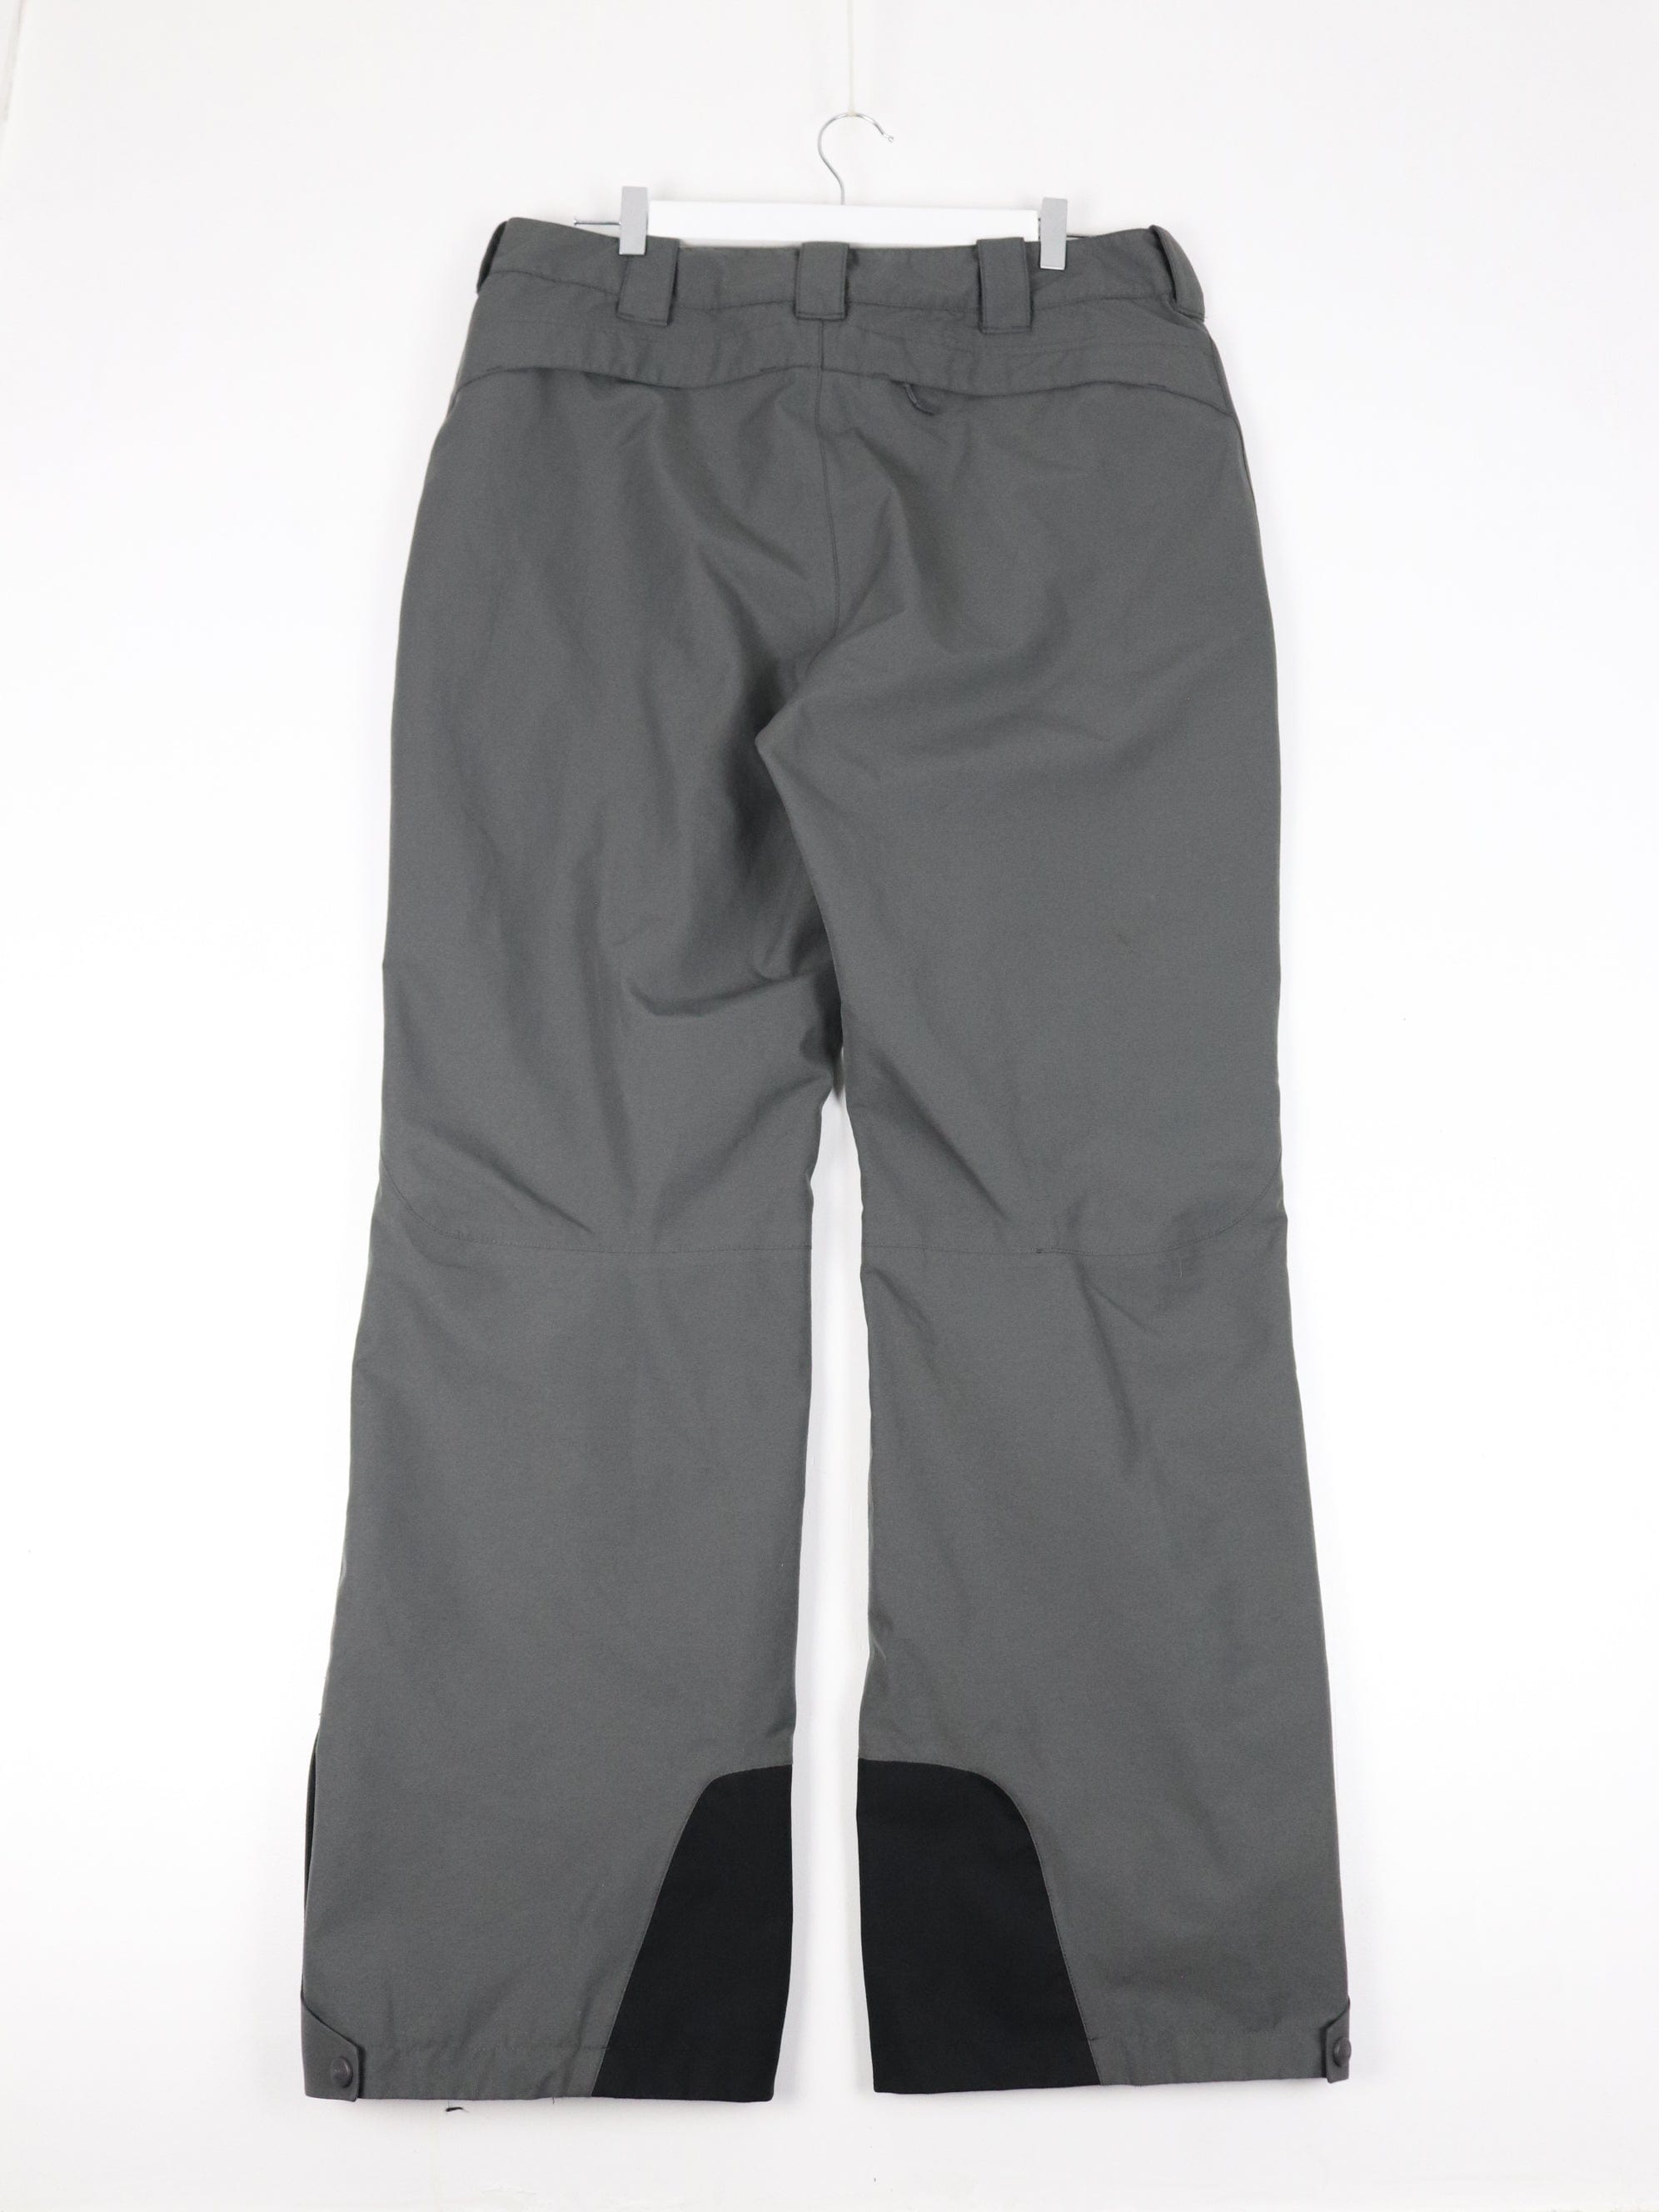 Marmot Motion Insulated Pant at Hilton's Tent City in Boston, MA